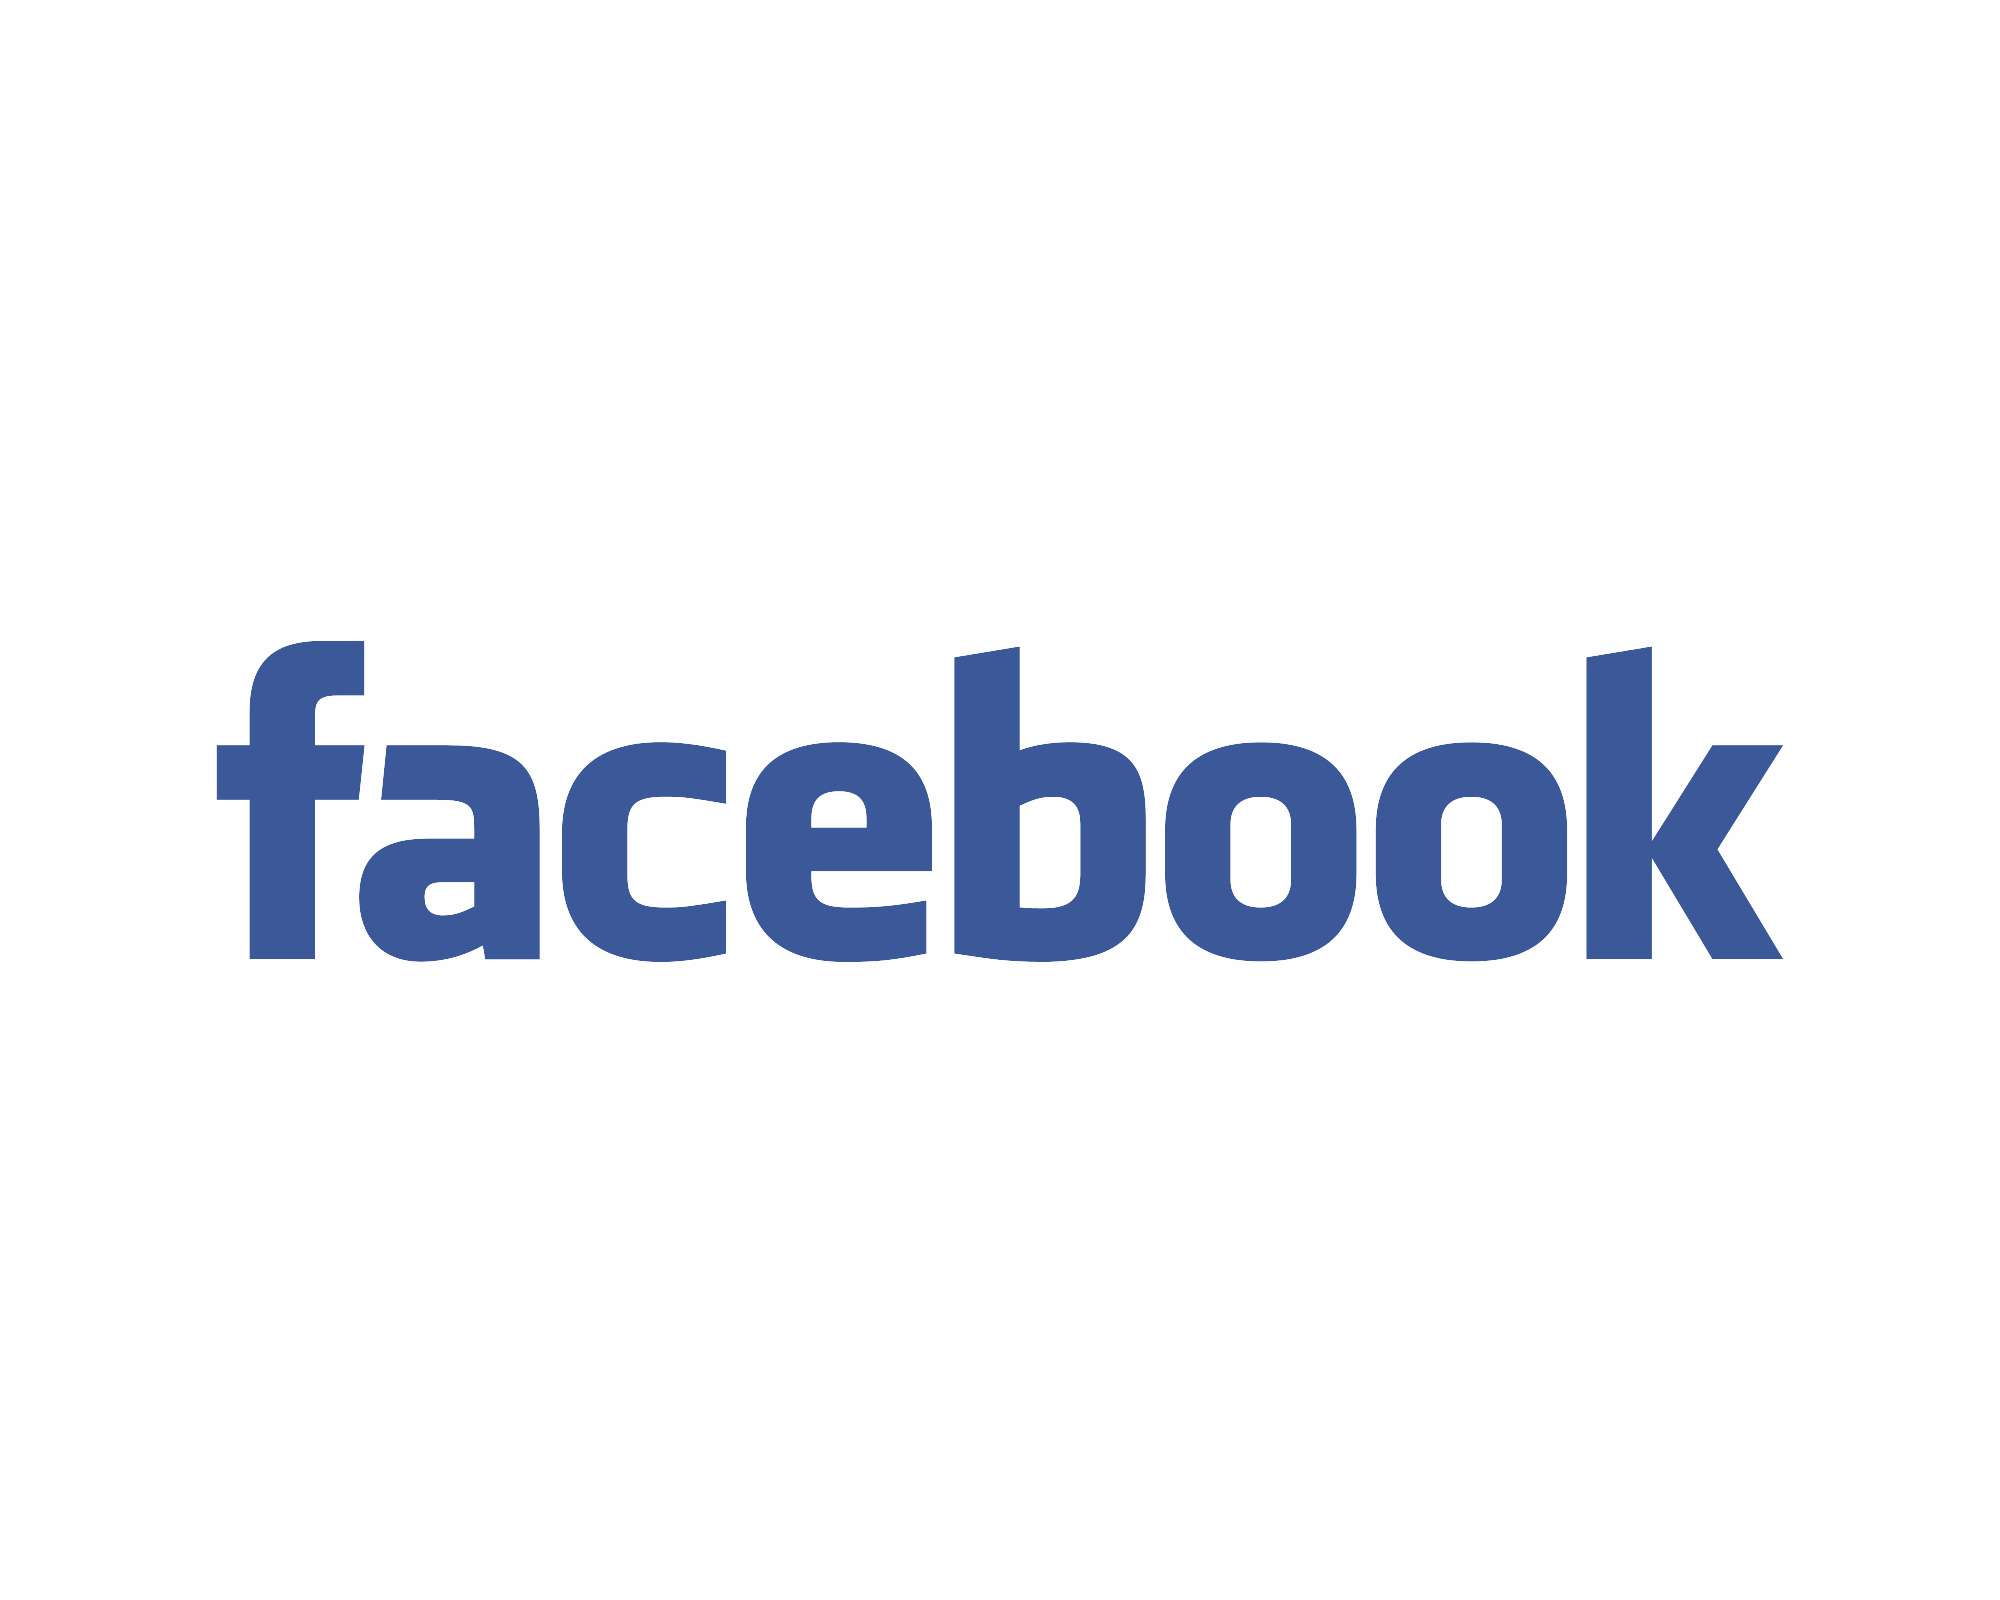 Facebook: Acquired Onavo, an Israeli analytics company, for approximately $120 million on October 13, 2013. 2000x1600 HD Background.